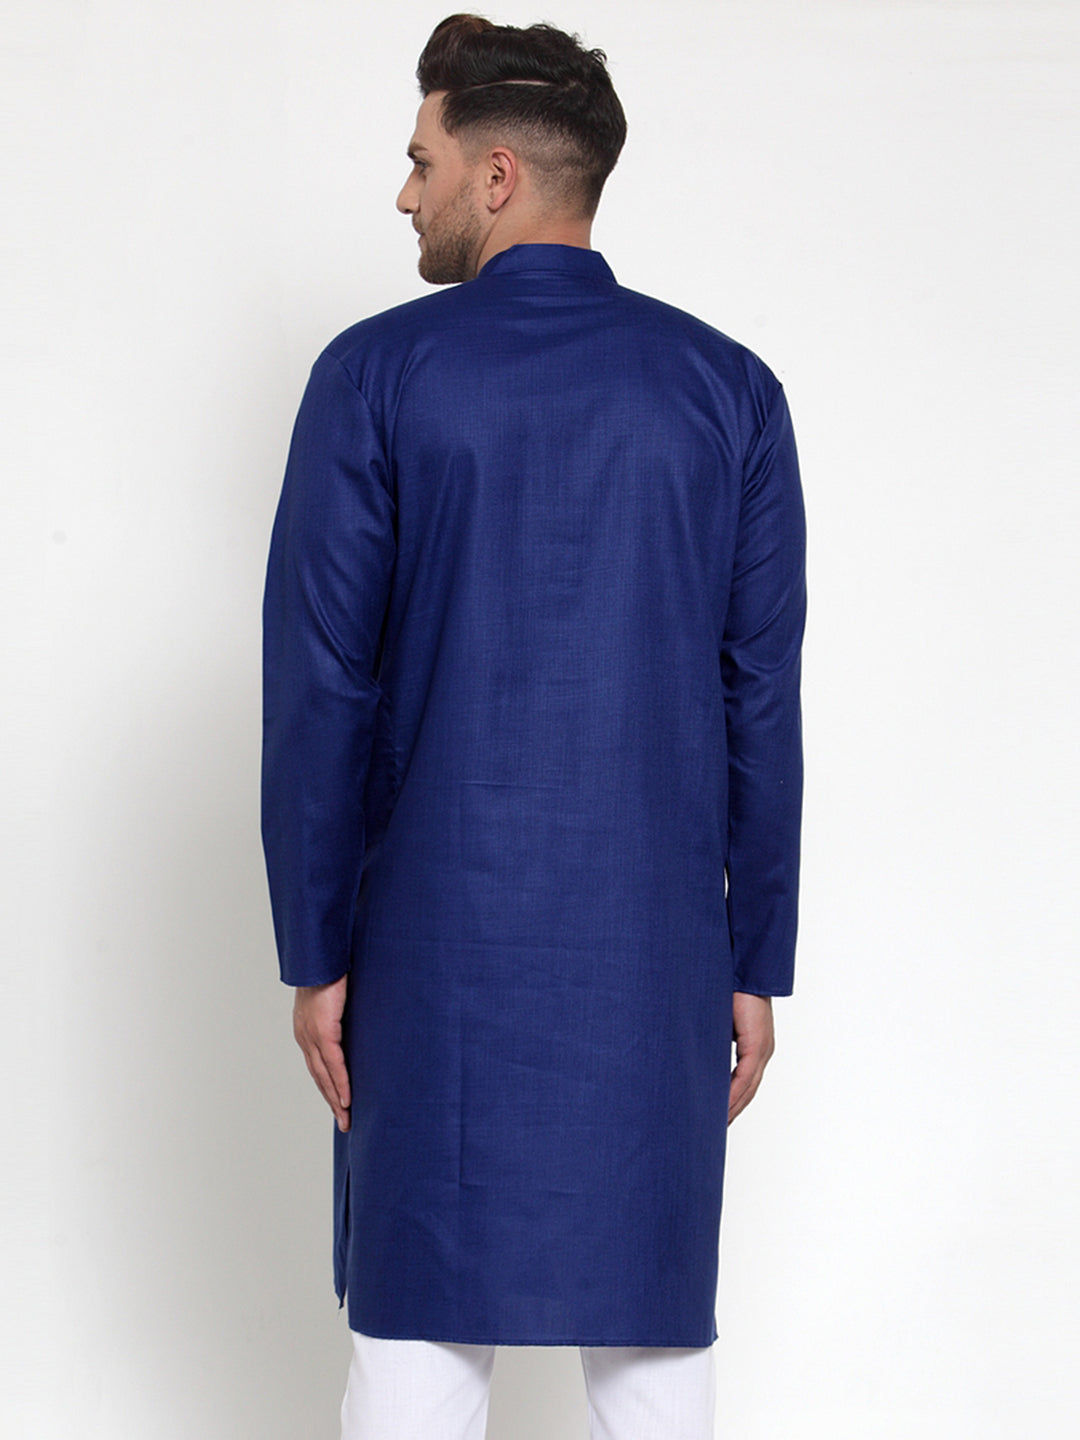 Jompers Men's Royal Blue Cotton Solid Kurta Only